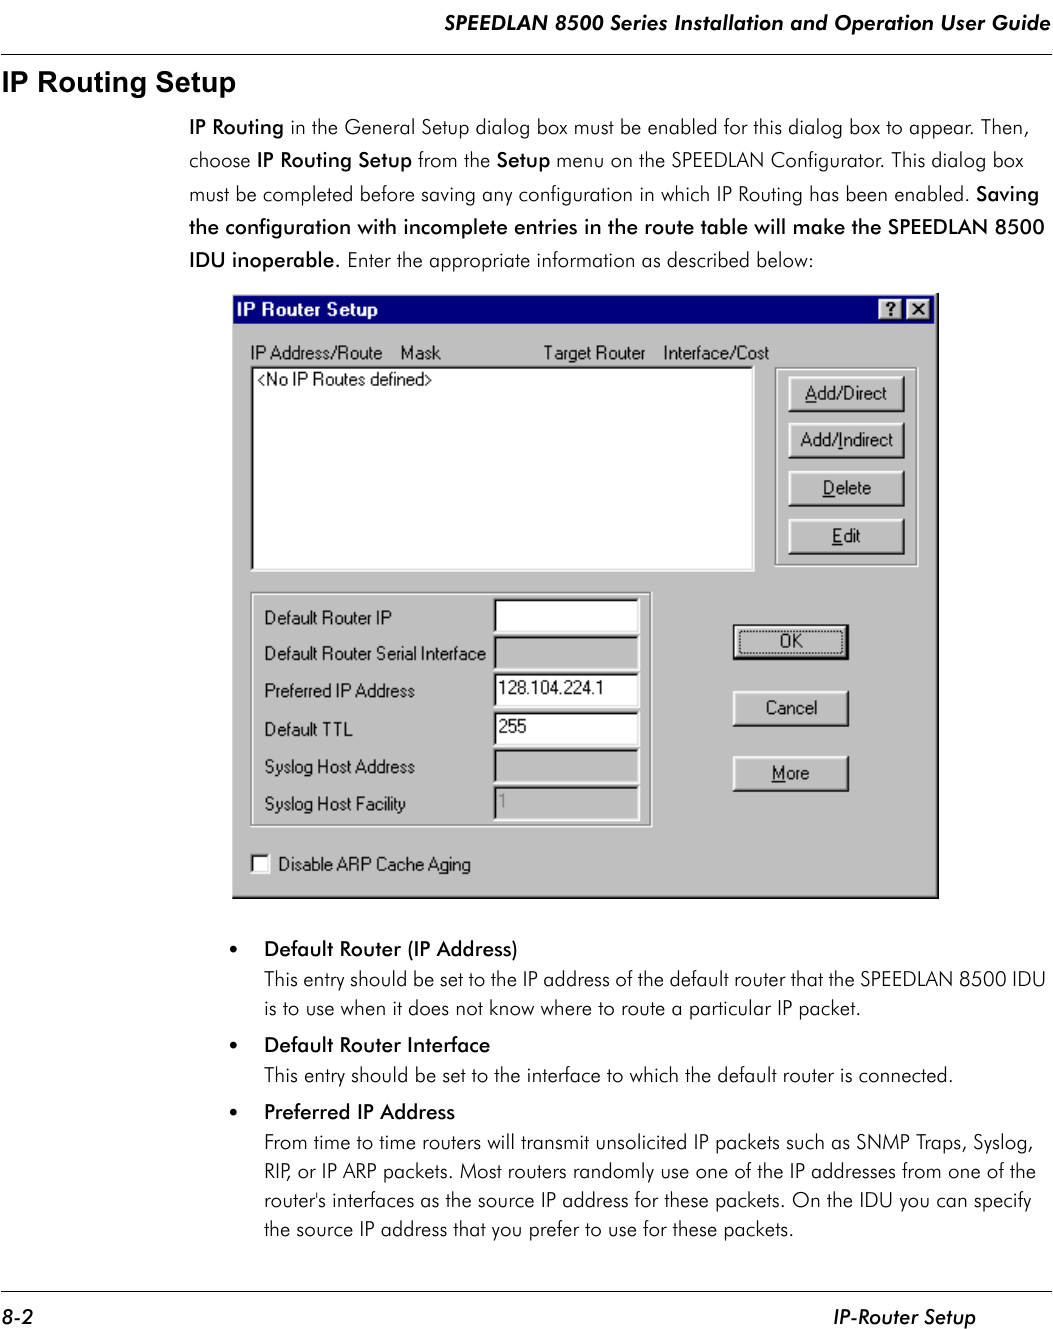 SPEEDLAN 8500 Series Installation and Operation User Guide 8-2 IP-Router SetupIP Routing SetupIP Routing in the General Setup dialog box must be enabled for this dialog box to appear. Then, choose IP Routing Setup from the Setup menu on the SPEEDLAN Configurator. This dialog box must be completed before saving any configuration in which IP Routing has been enabled. Saving the configuration with incomplete entries in the route table will make the SPEEDLAN 8500 IDU inoperable. Enter the appropriate information as described below:•Default Router (IP Address)This entry should be set to the IP address of the default router that the SPEEDLAN 8500 IDU is to use when it does not know where to route a particular IP packet.  •Default Router InterfaceThis entry should be set to the interface to which the default router is connected.   •Preferred IP AddressFrom time to time routers will transmit unsolicited IP packets such as SNMP Traps, Syslog, RIP, or IP ARP packets. Most routers randomly use one of the IP addresses from one of the router&apos;s interfaces as the source IP address for these packets. On the IDU you can specify the source IP address that you prefer to use for these packets.               